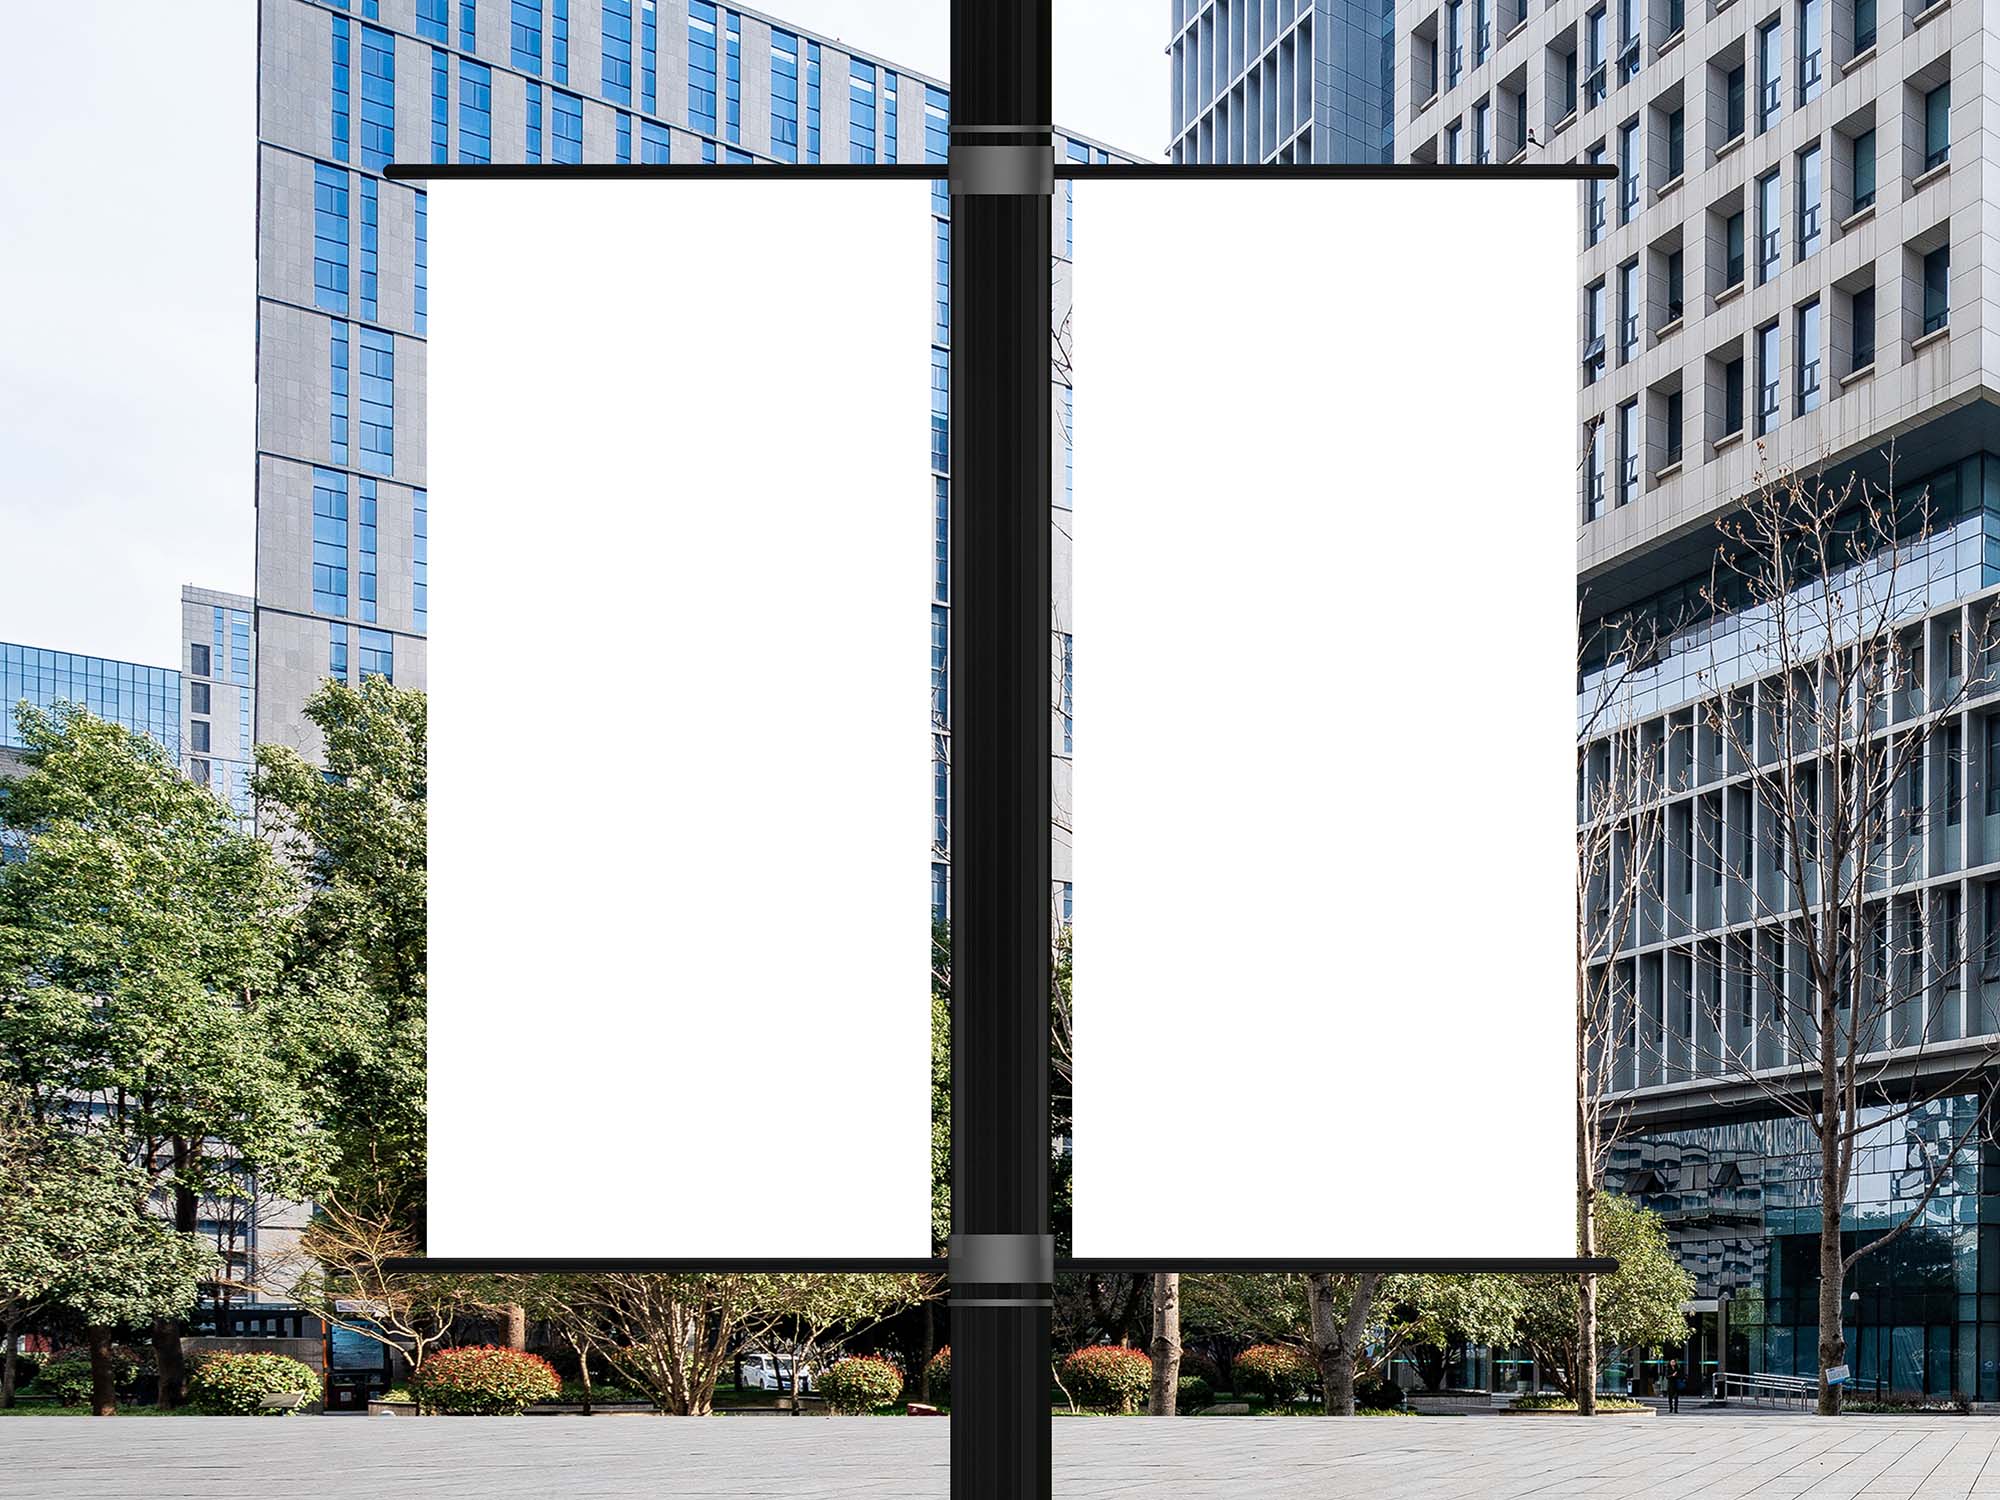 Free Outdoor Lamp Post Banners Mockup (PSD)